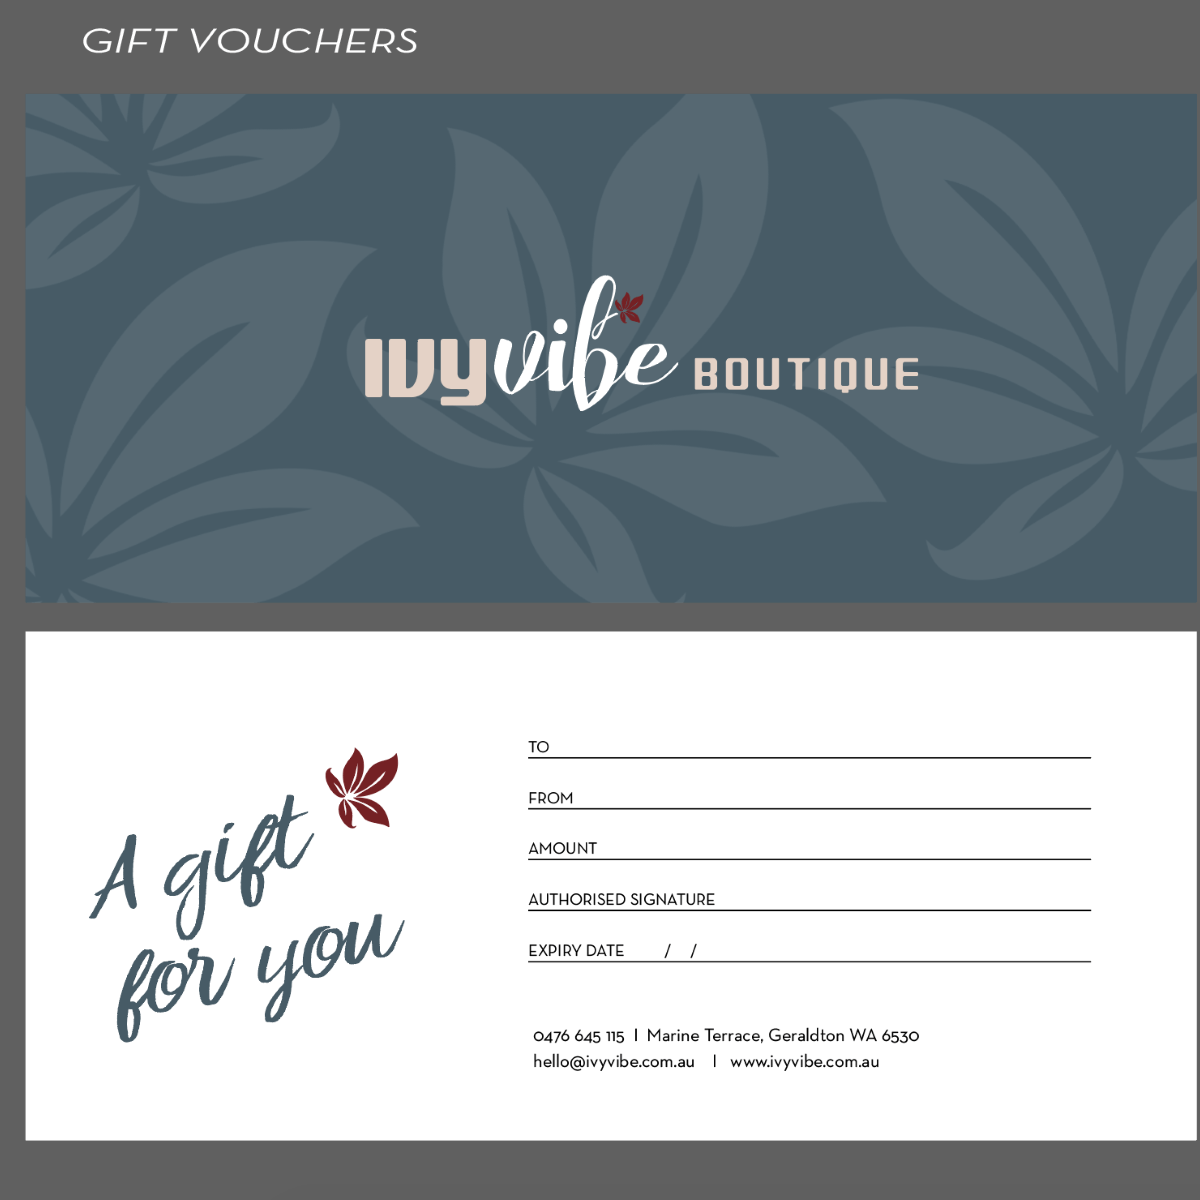 gift card - $50.00 Gift Cards IVY VIBE 